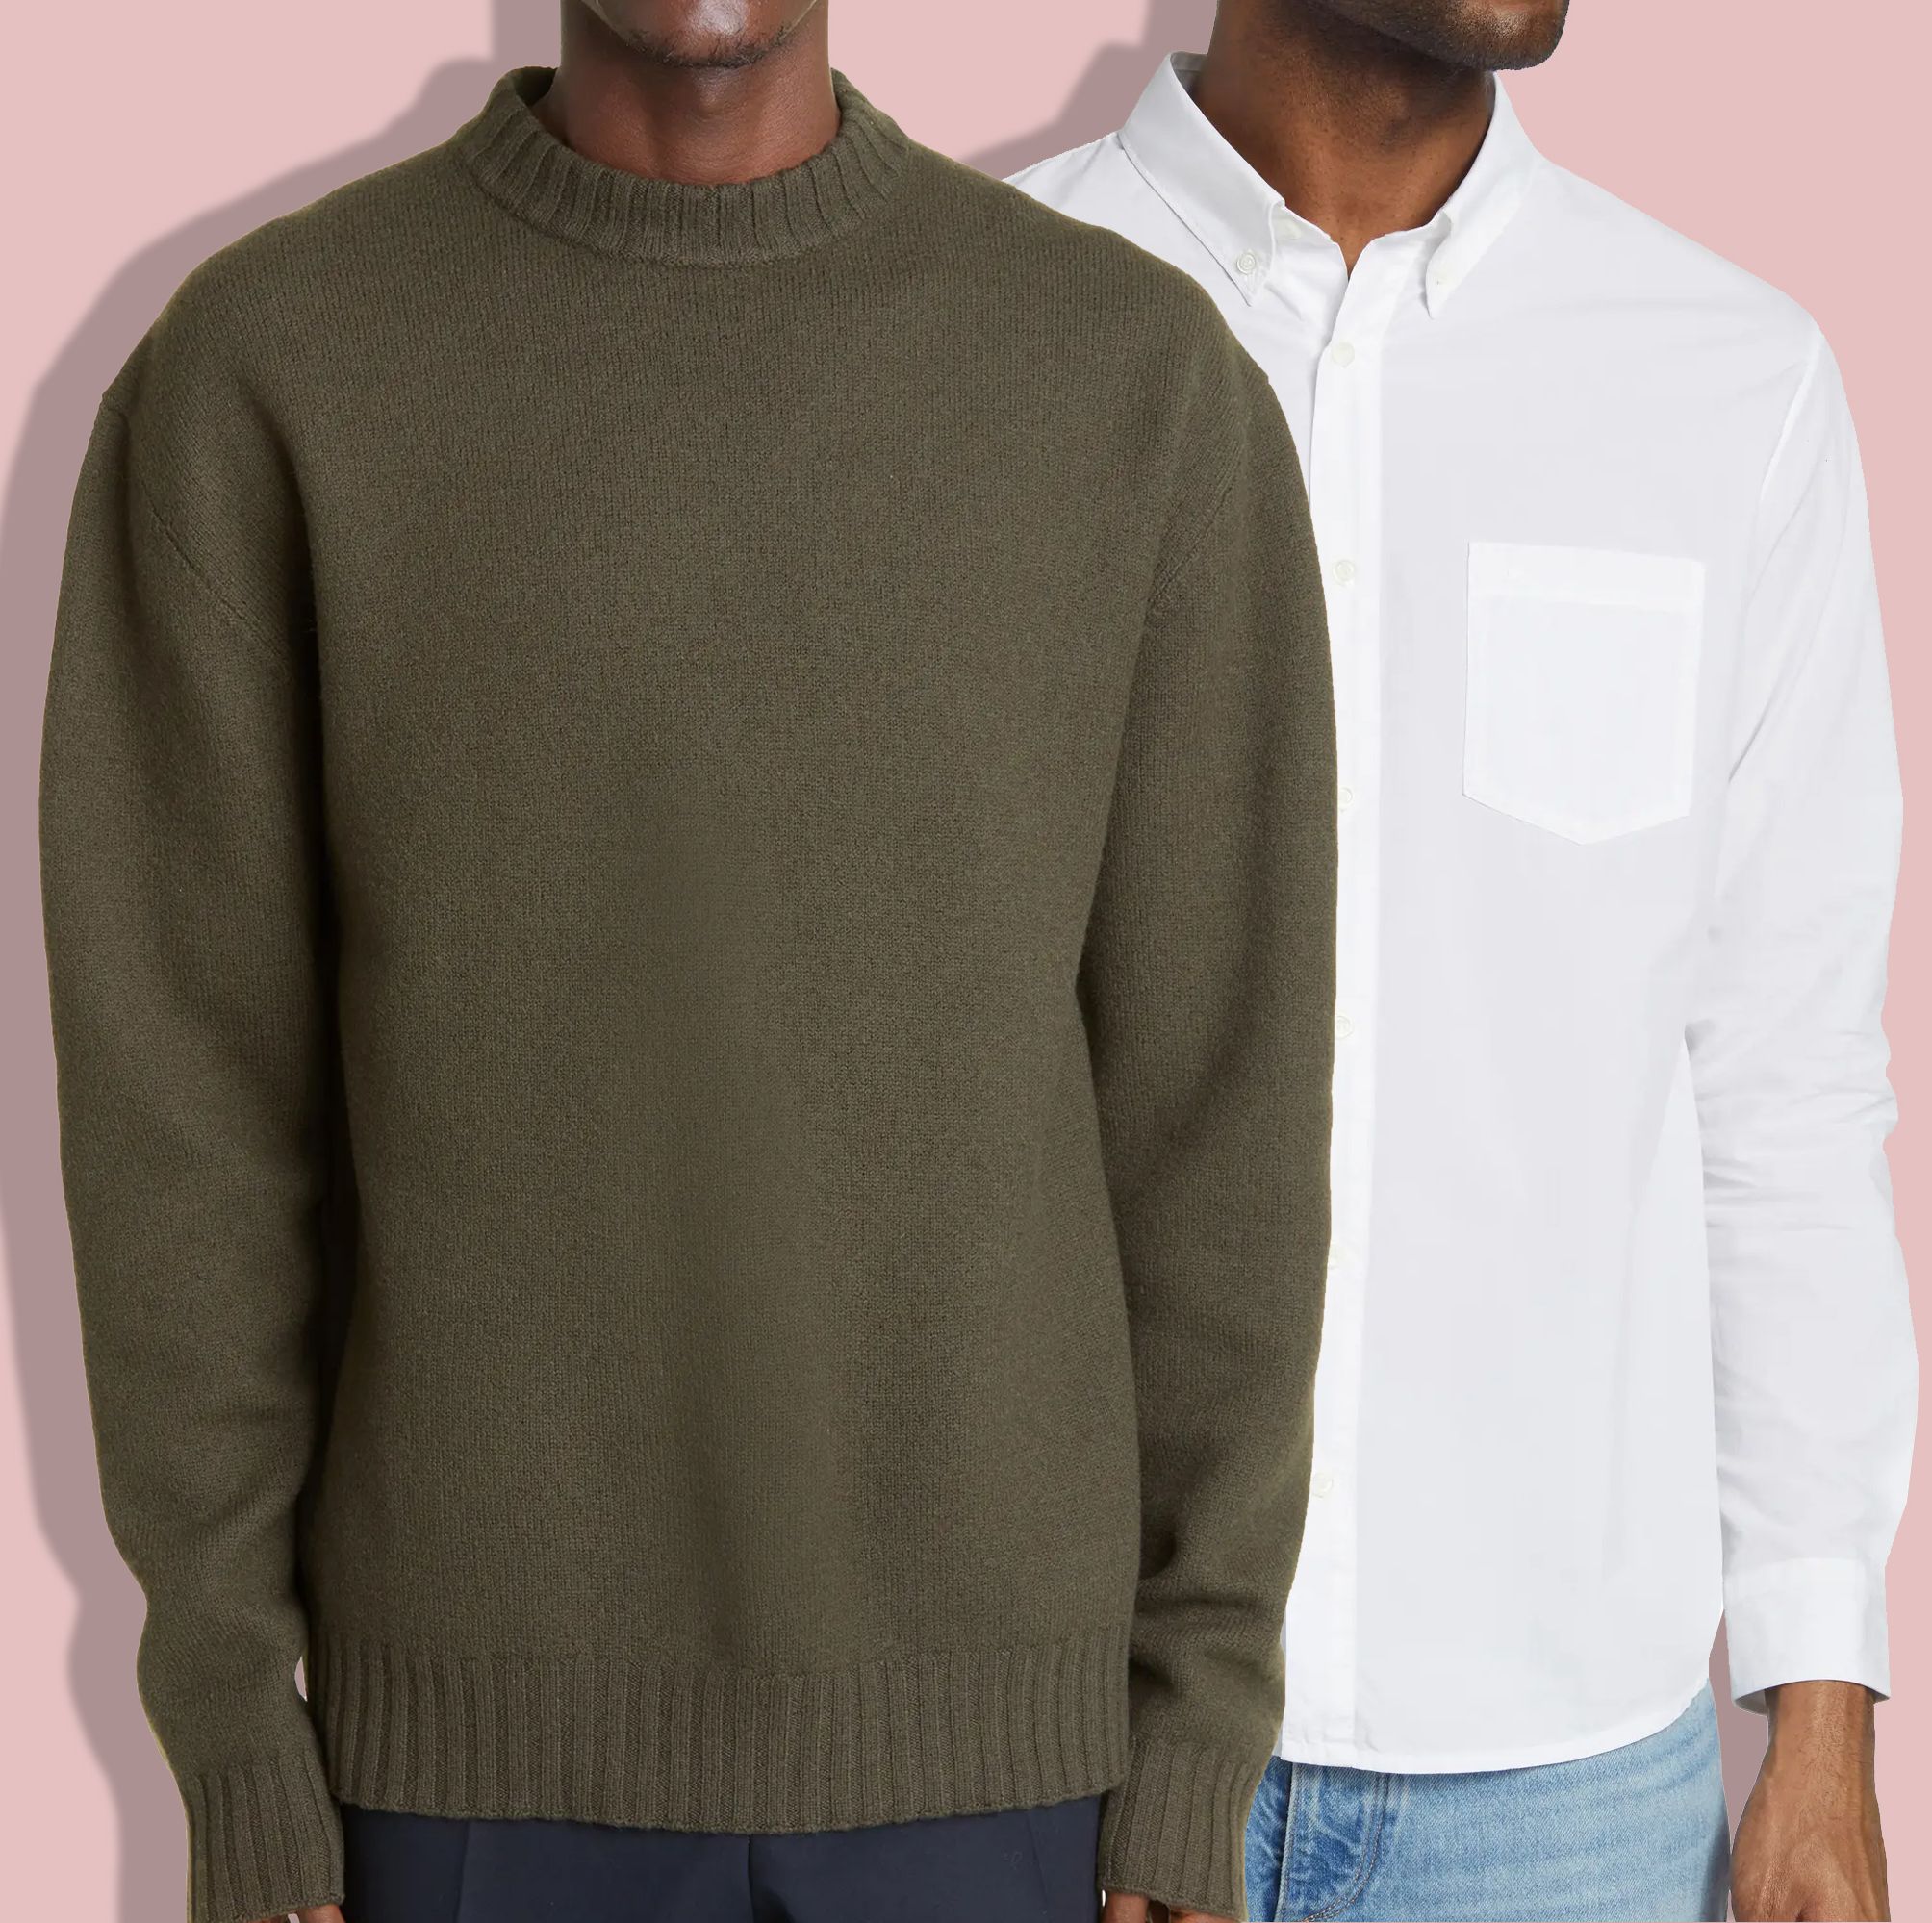 The 20 Best Menswear Deals To Shop During Nordstrom's Half-Yearly Sale